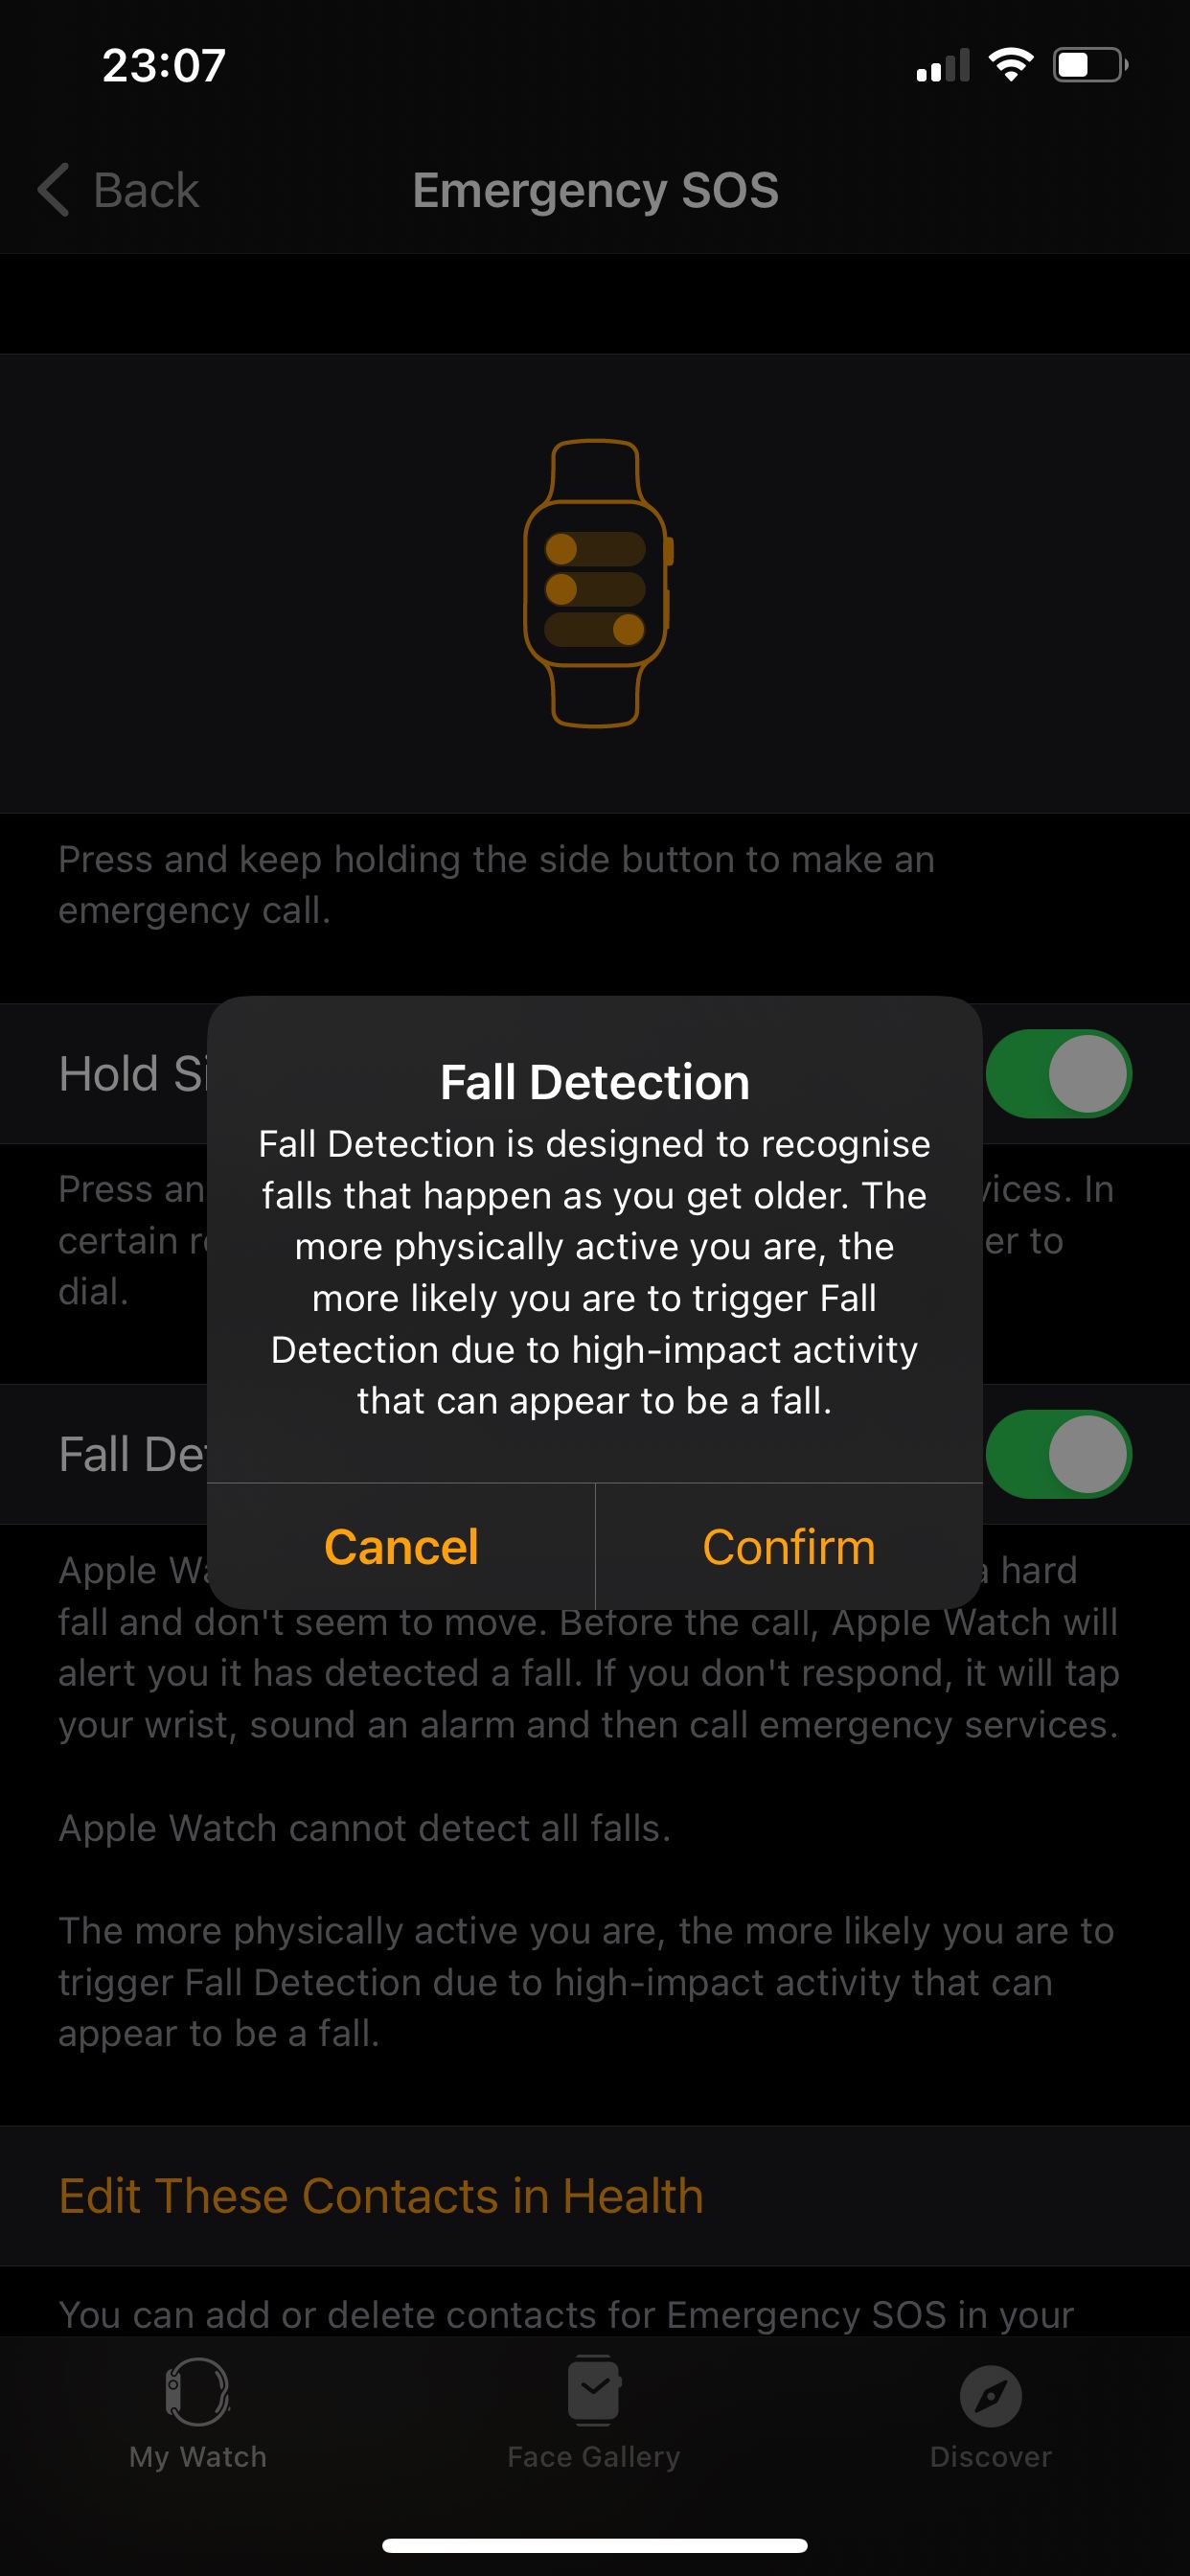 Apple Watch's Fall Detection feature may be accidentally triggered sometimes.